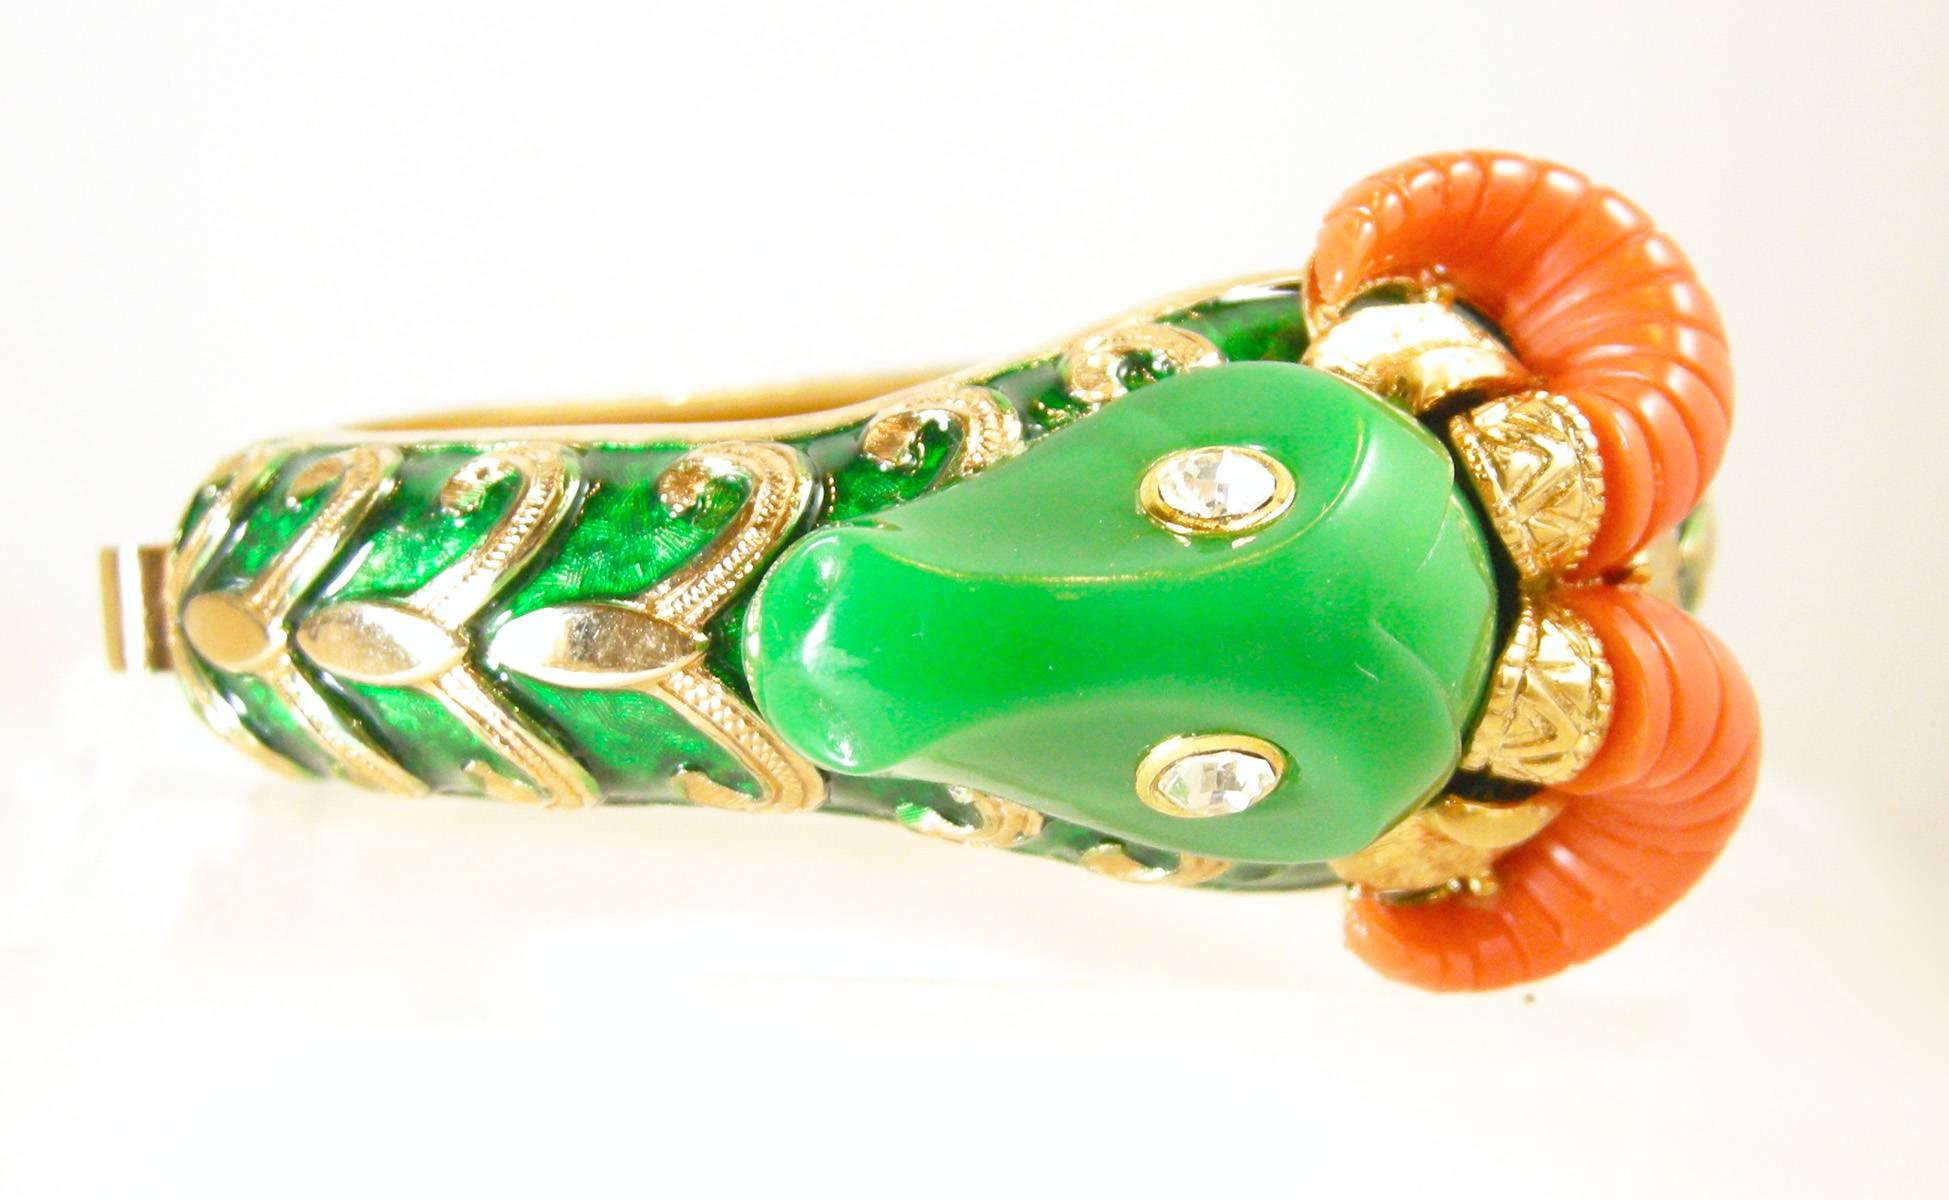 This is a rare vintage Kenneth Jay Lane with the old K.J.L signature.  This ram bracelet is made of a dark green enamel with a gold tone swirl design.  The head is made with a dark green resin and has clear crystals for eyes. The horns are coral